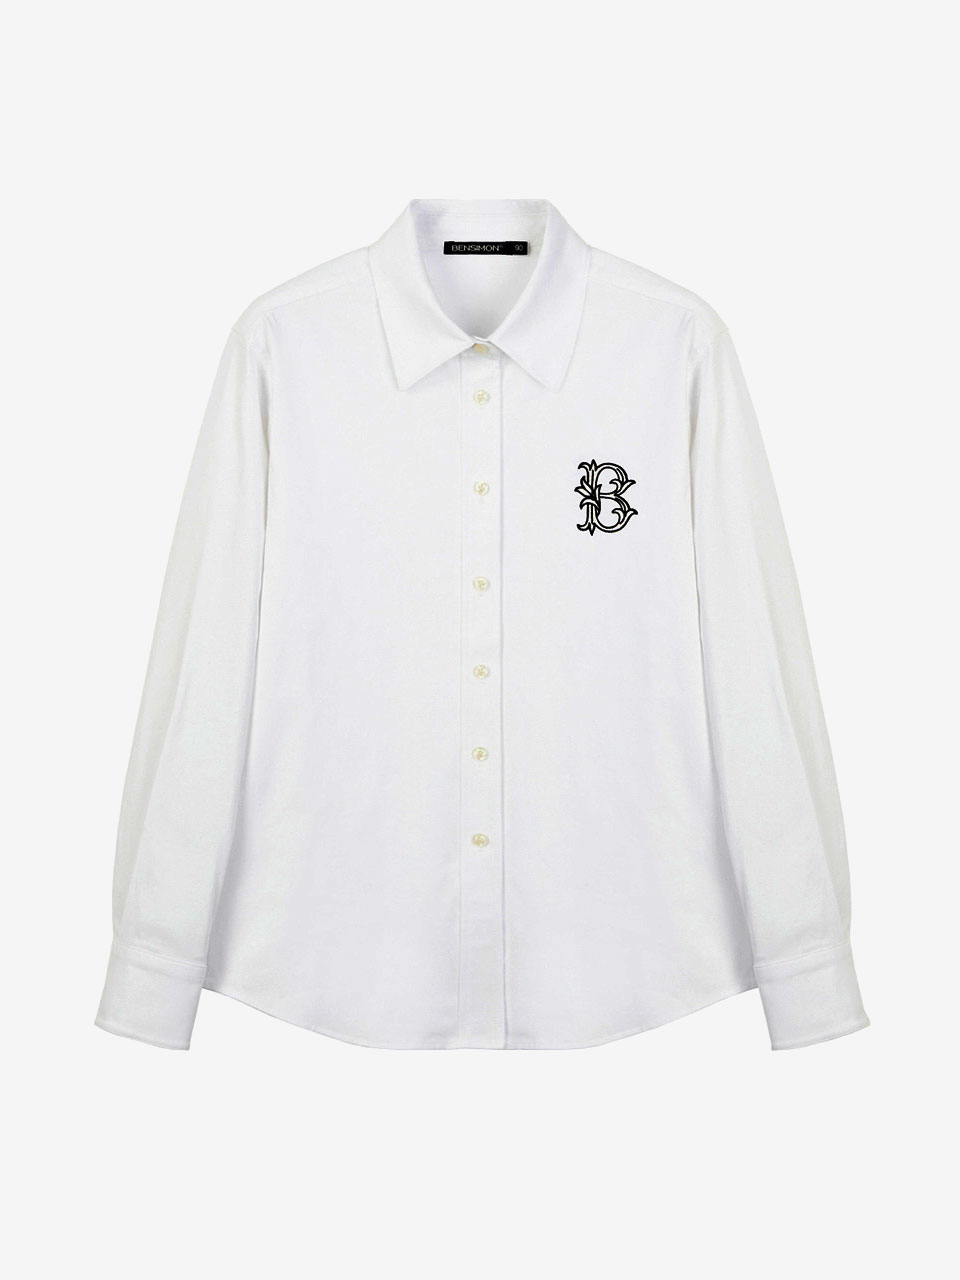 [LIMITED] OXFORTD SHIRT (FOR WOMEN) - WHITE